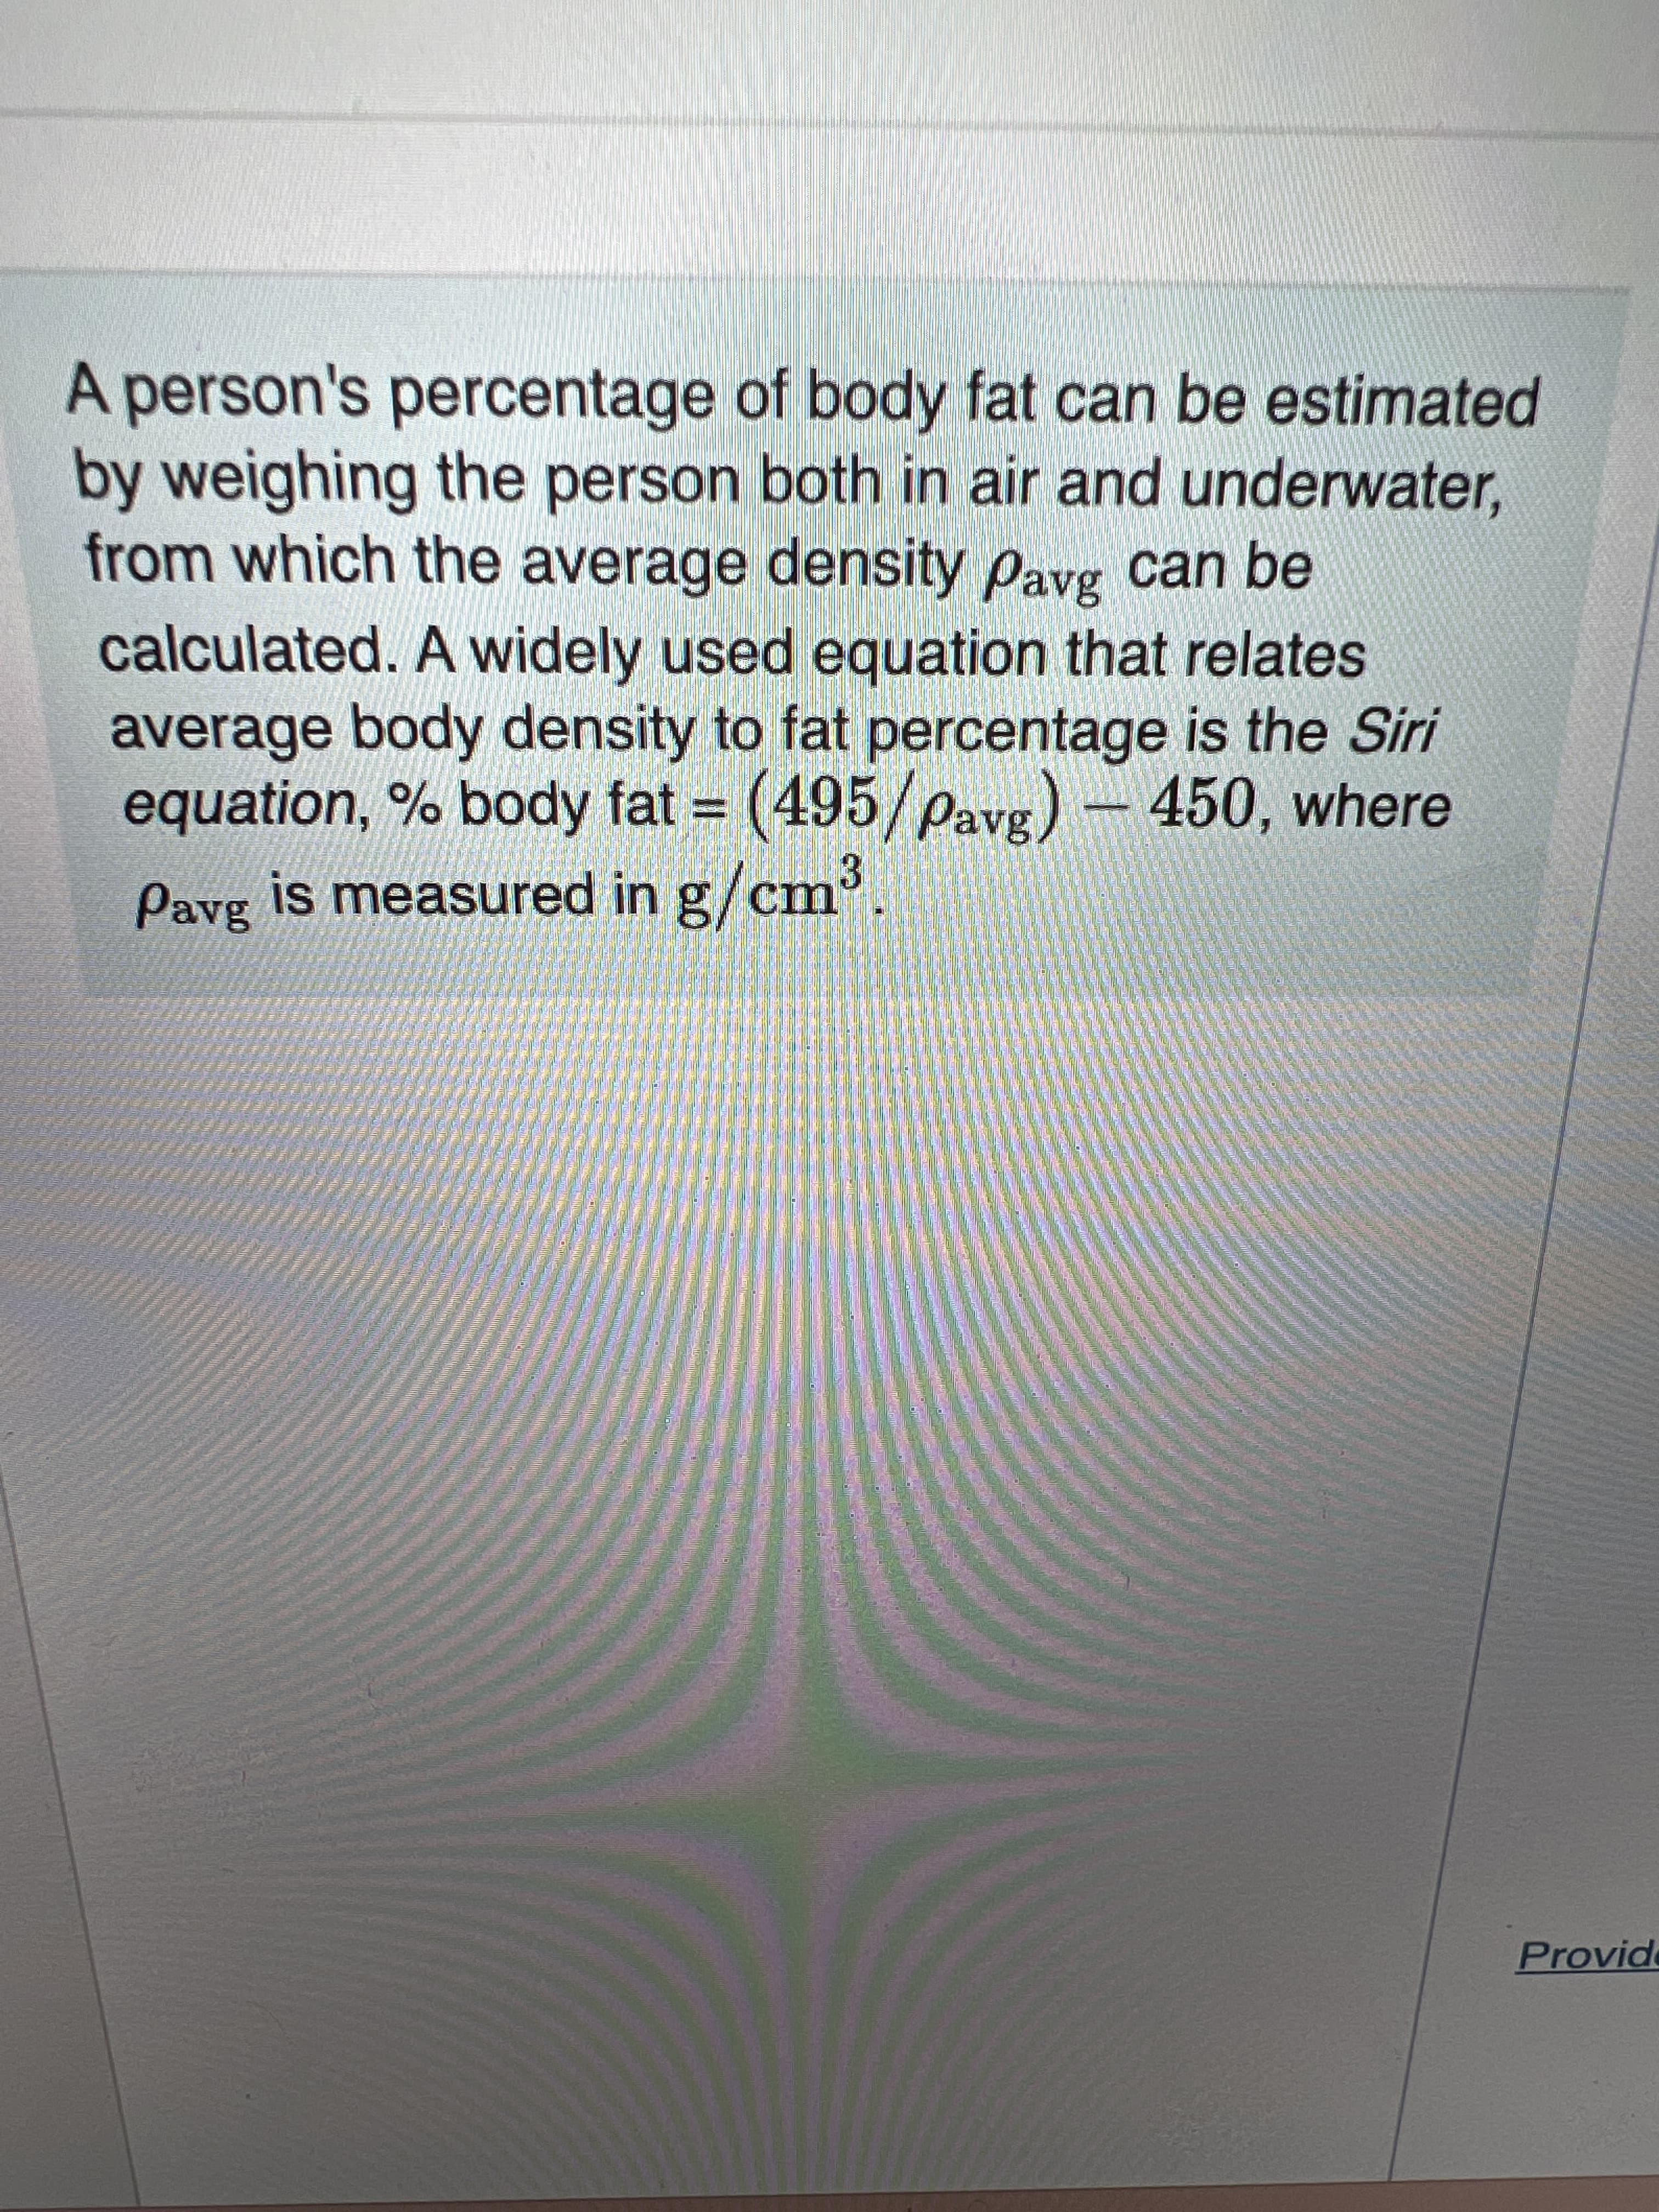 A person's percentage of body fat can be estimated
by weighing the person both in air and underwater,
from which the average density pavg can be
calculated. A widely used equation that relates
average body density to fat percentage is the Siri
equation, % body fat = (495/pavg)
- 450, where
%3D
Pavg is measured in g/cm.
Provide
